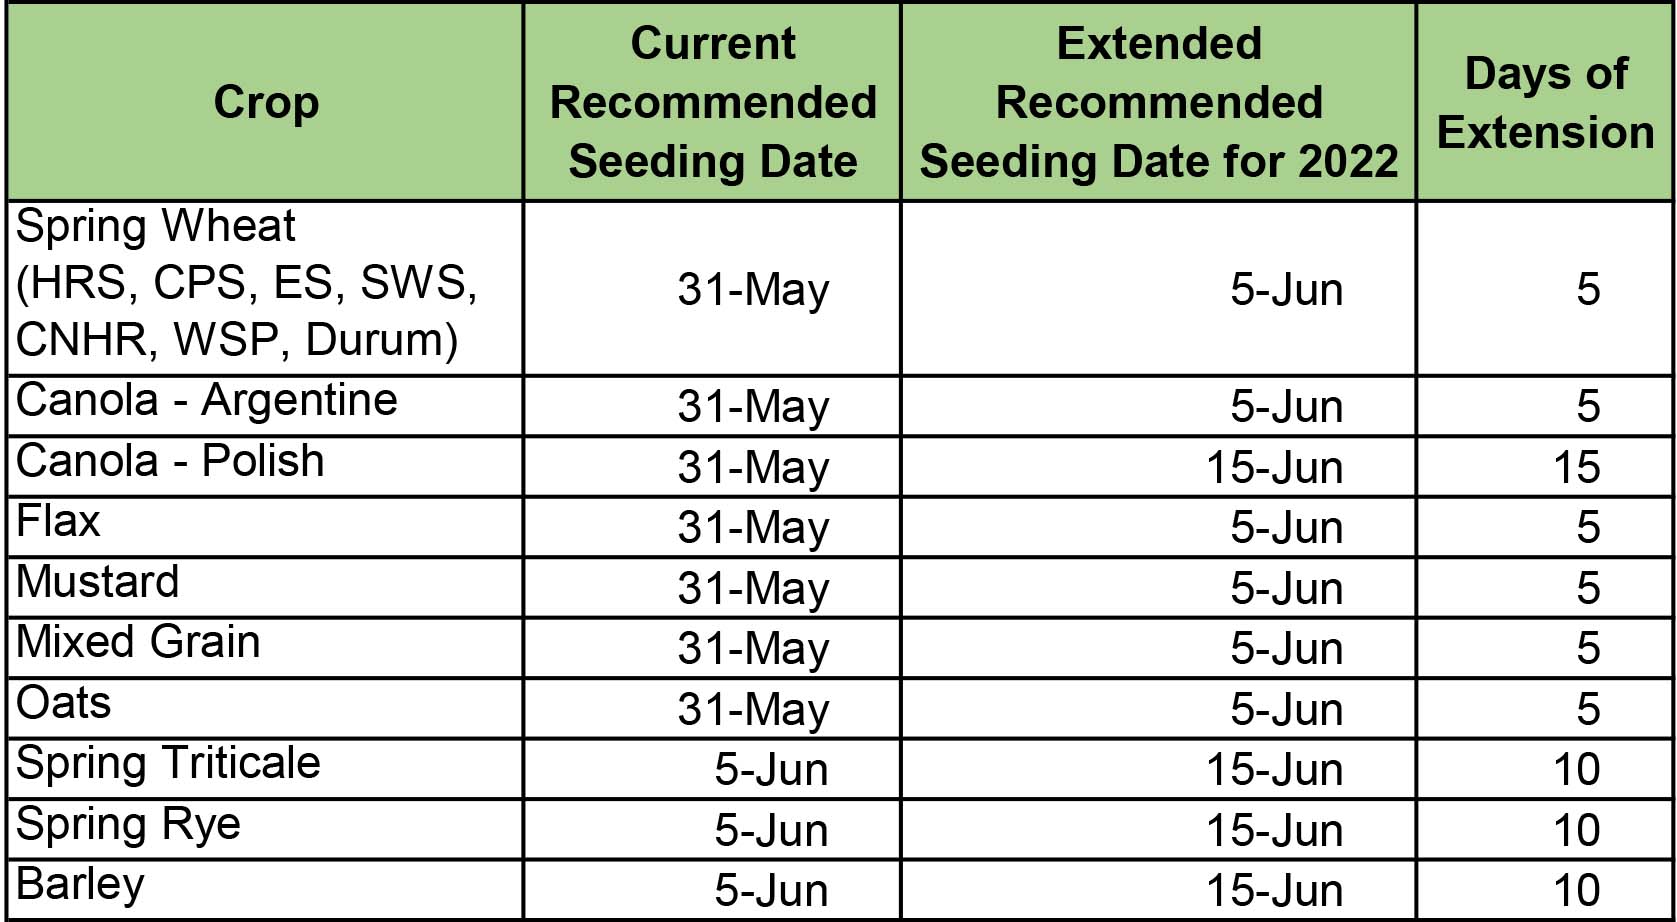 AFSC extending seeding dates for 2022 crop year